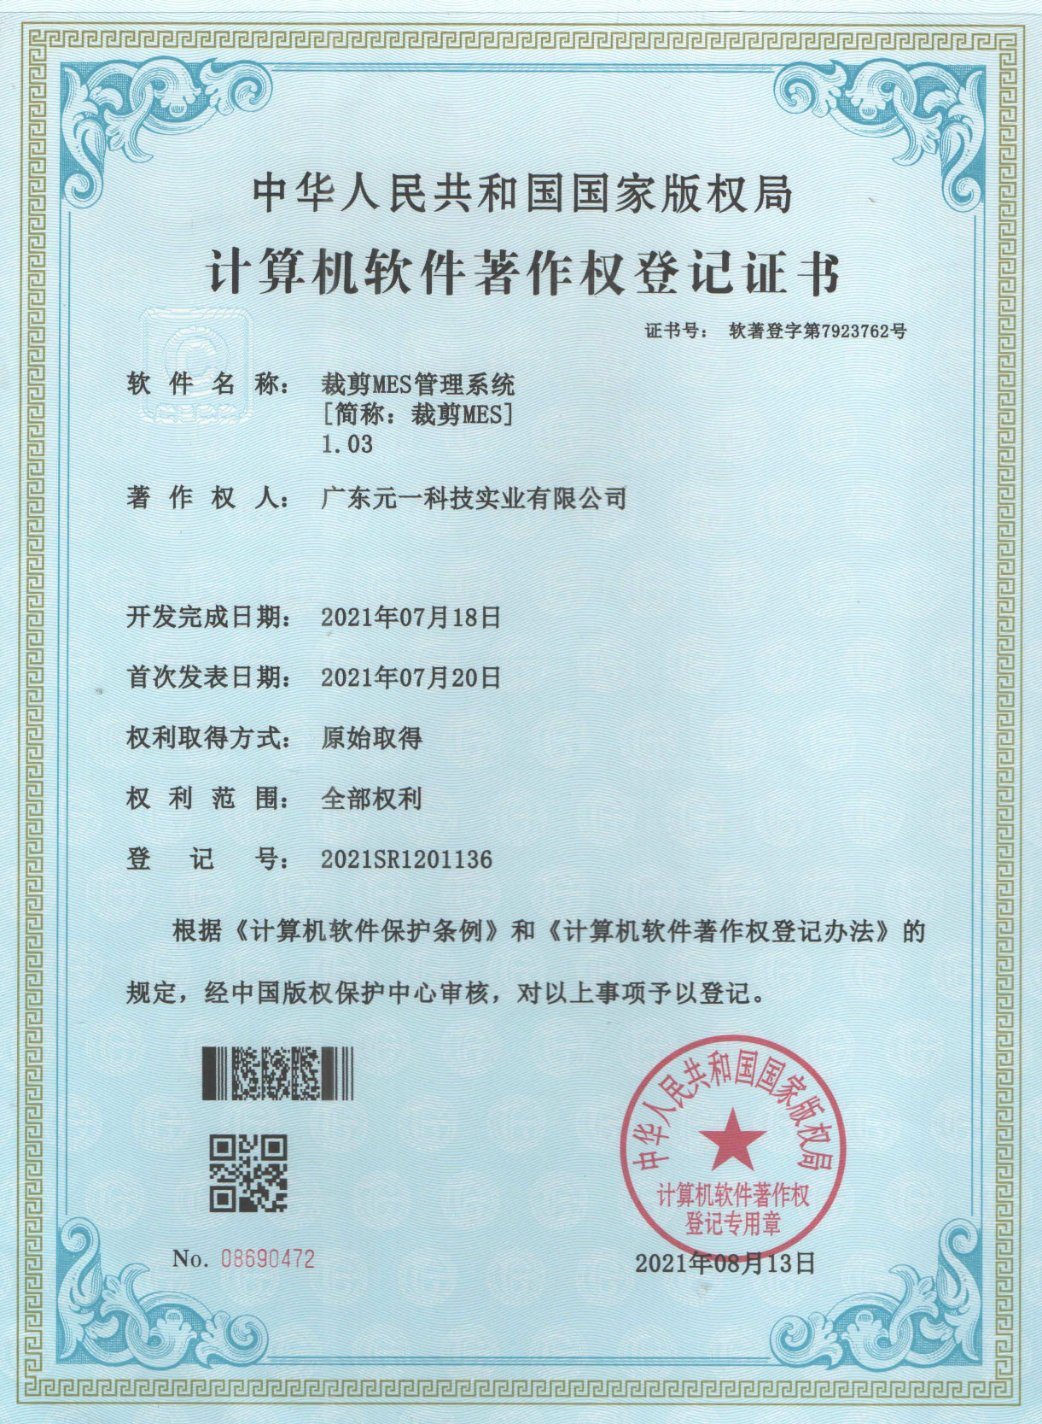 Cutting MES management system copyright certificate